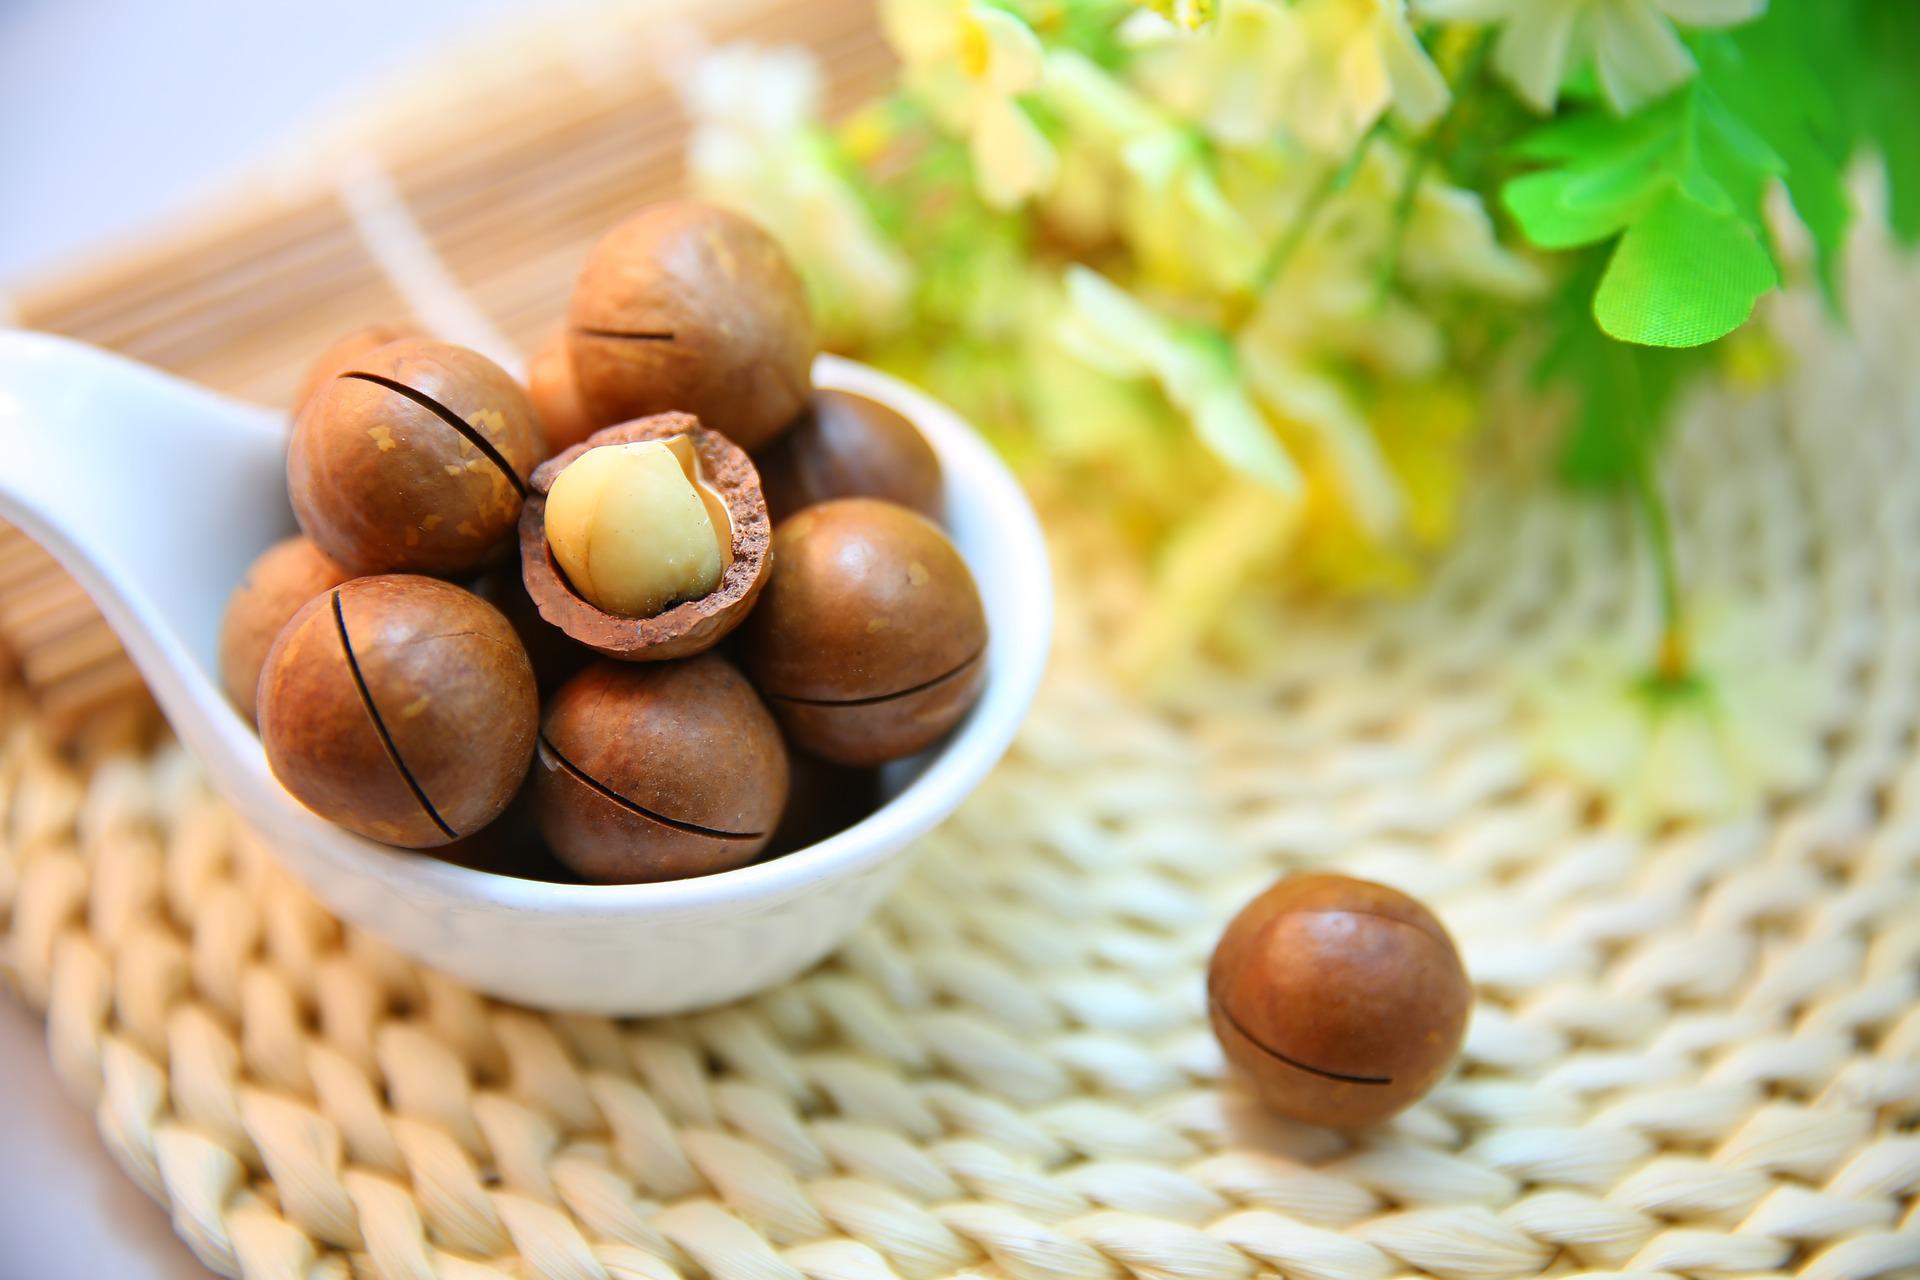 Super-charged Superfood: The Macadamia Nut - Blog | Macadamia Nuts, Macadamia Nut Bars & More